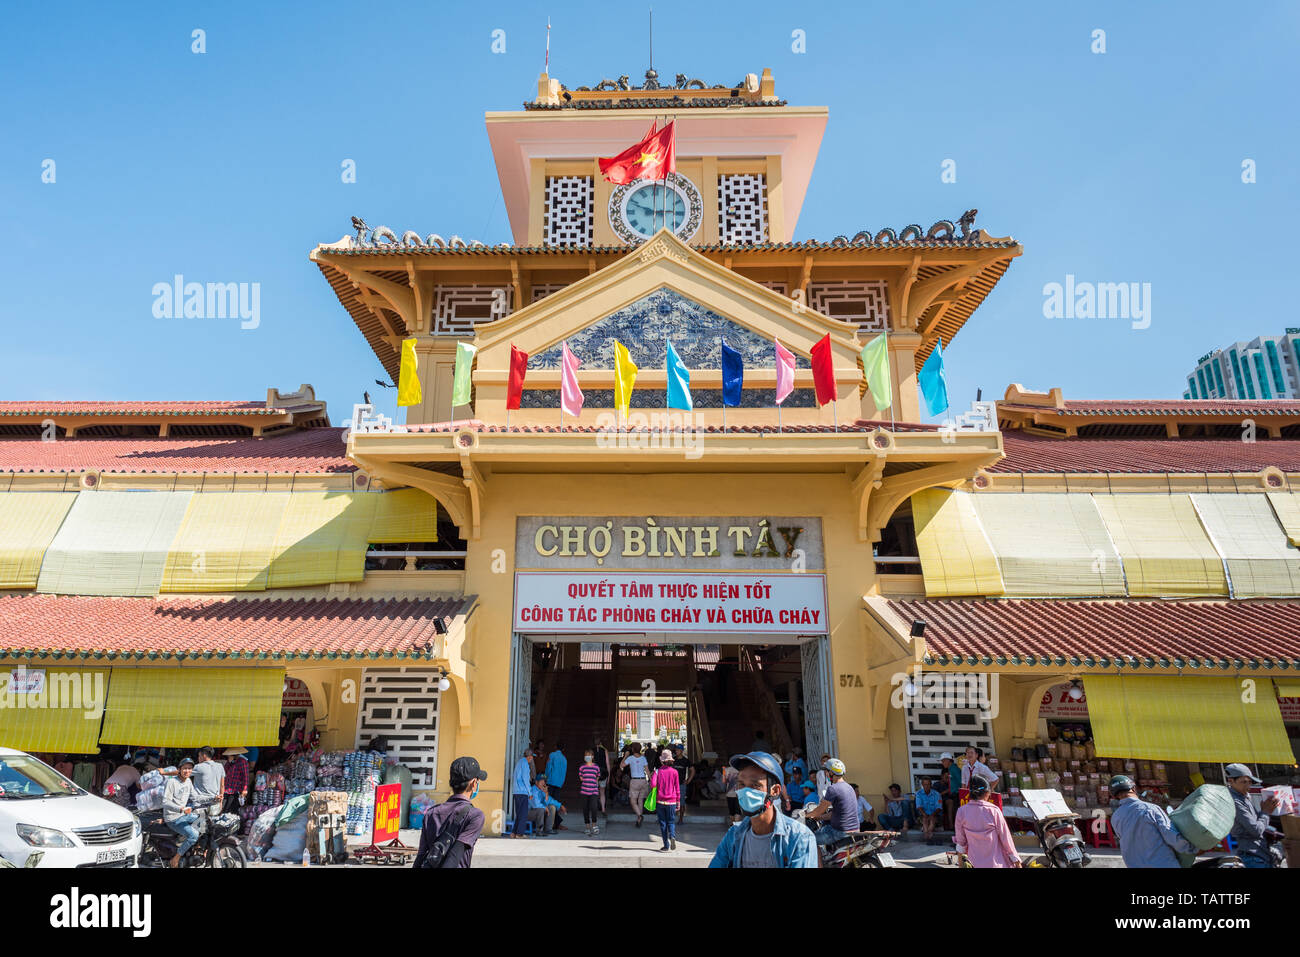 Ho Chi Minh City, Vietnam - April 15, 2019: the exterior of the central entrance and the tower of Cho Binh Tay market in Cho Lon (Cholon), a Chinatown Stock Photo